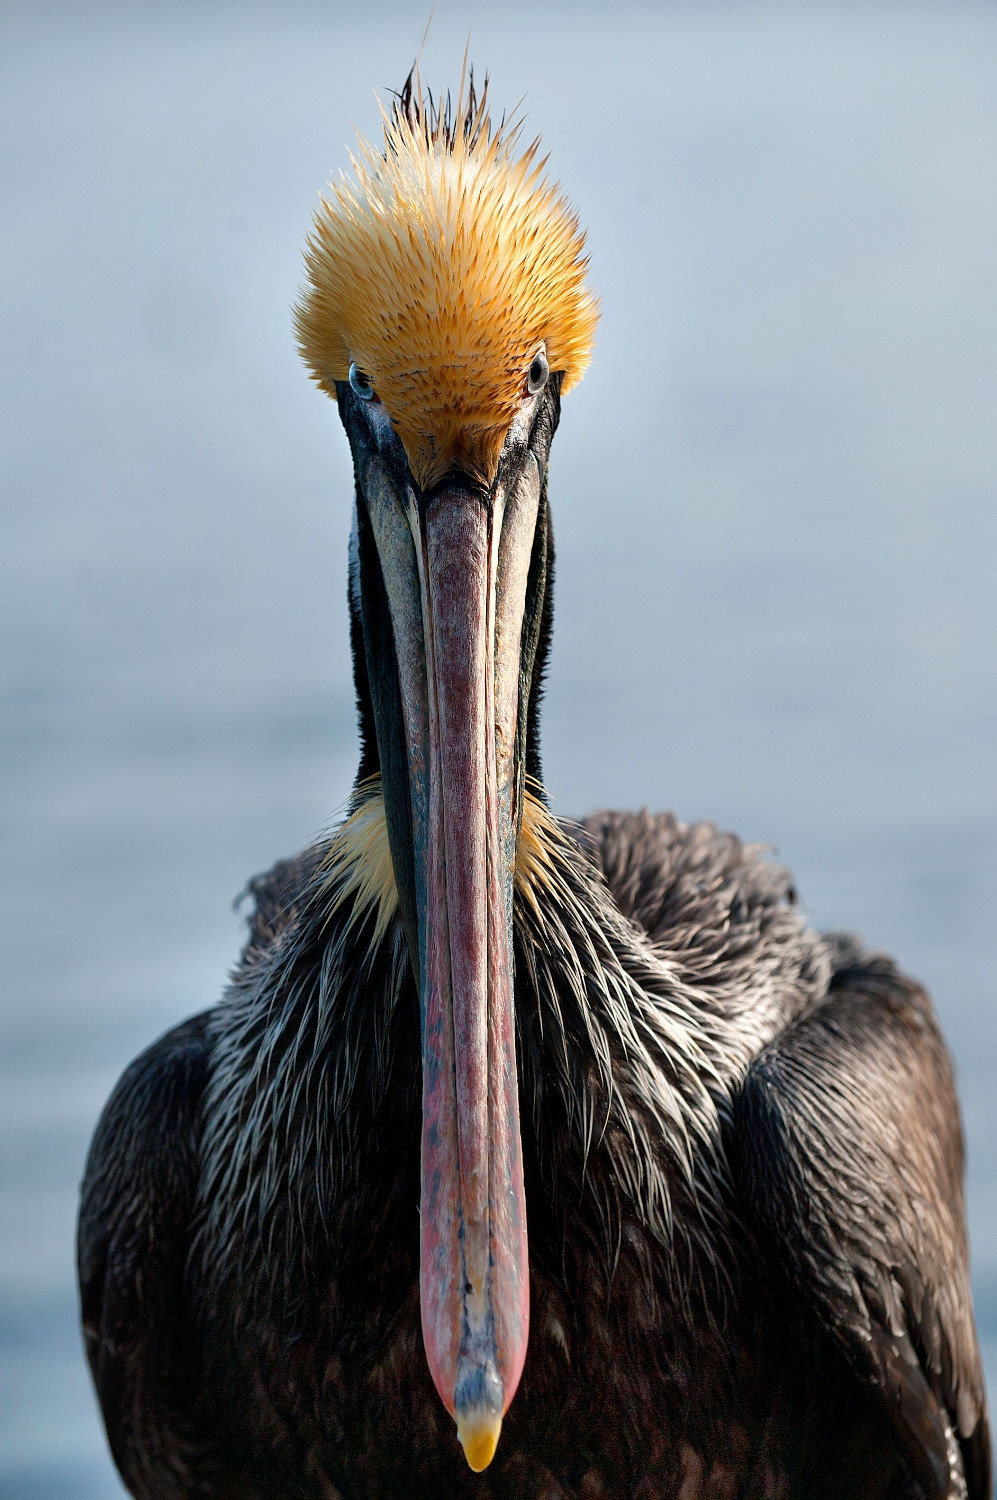  A brown pelican (Pelecanus occidentalis) at old fisherman's wharf in Monterey on Tuesday, February 21, 2012. 